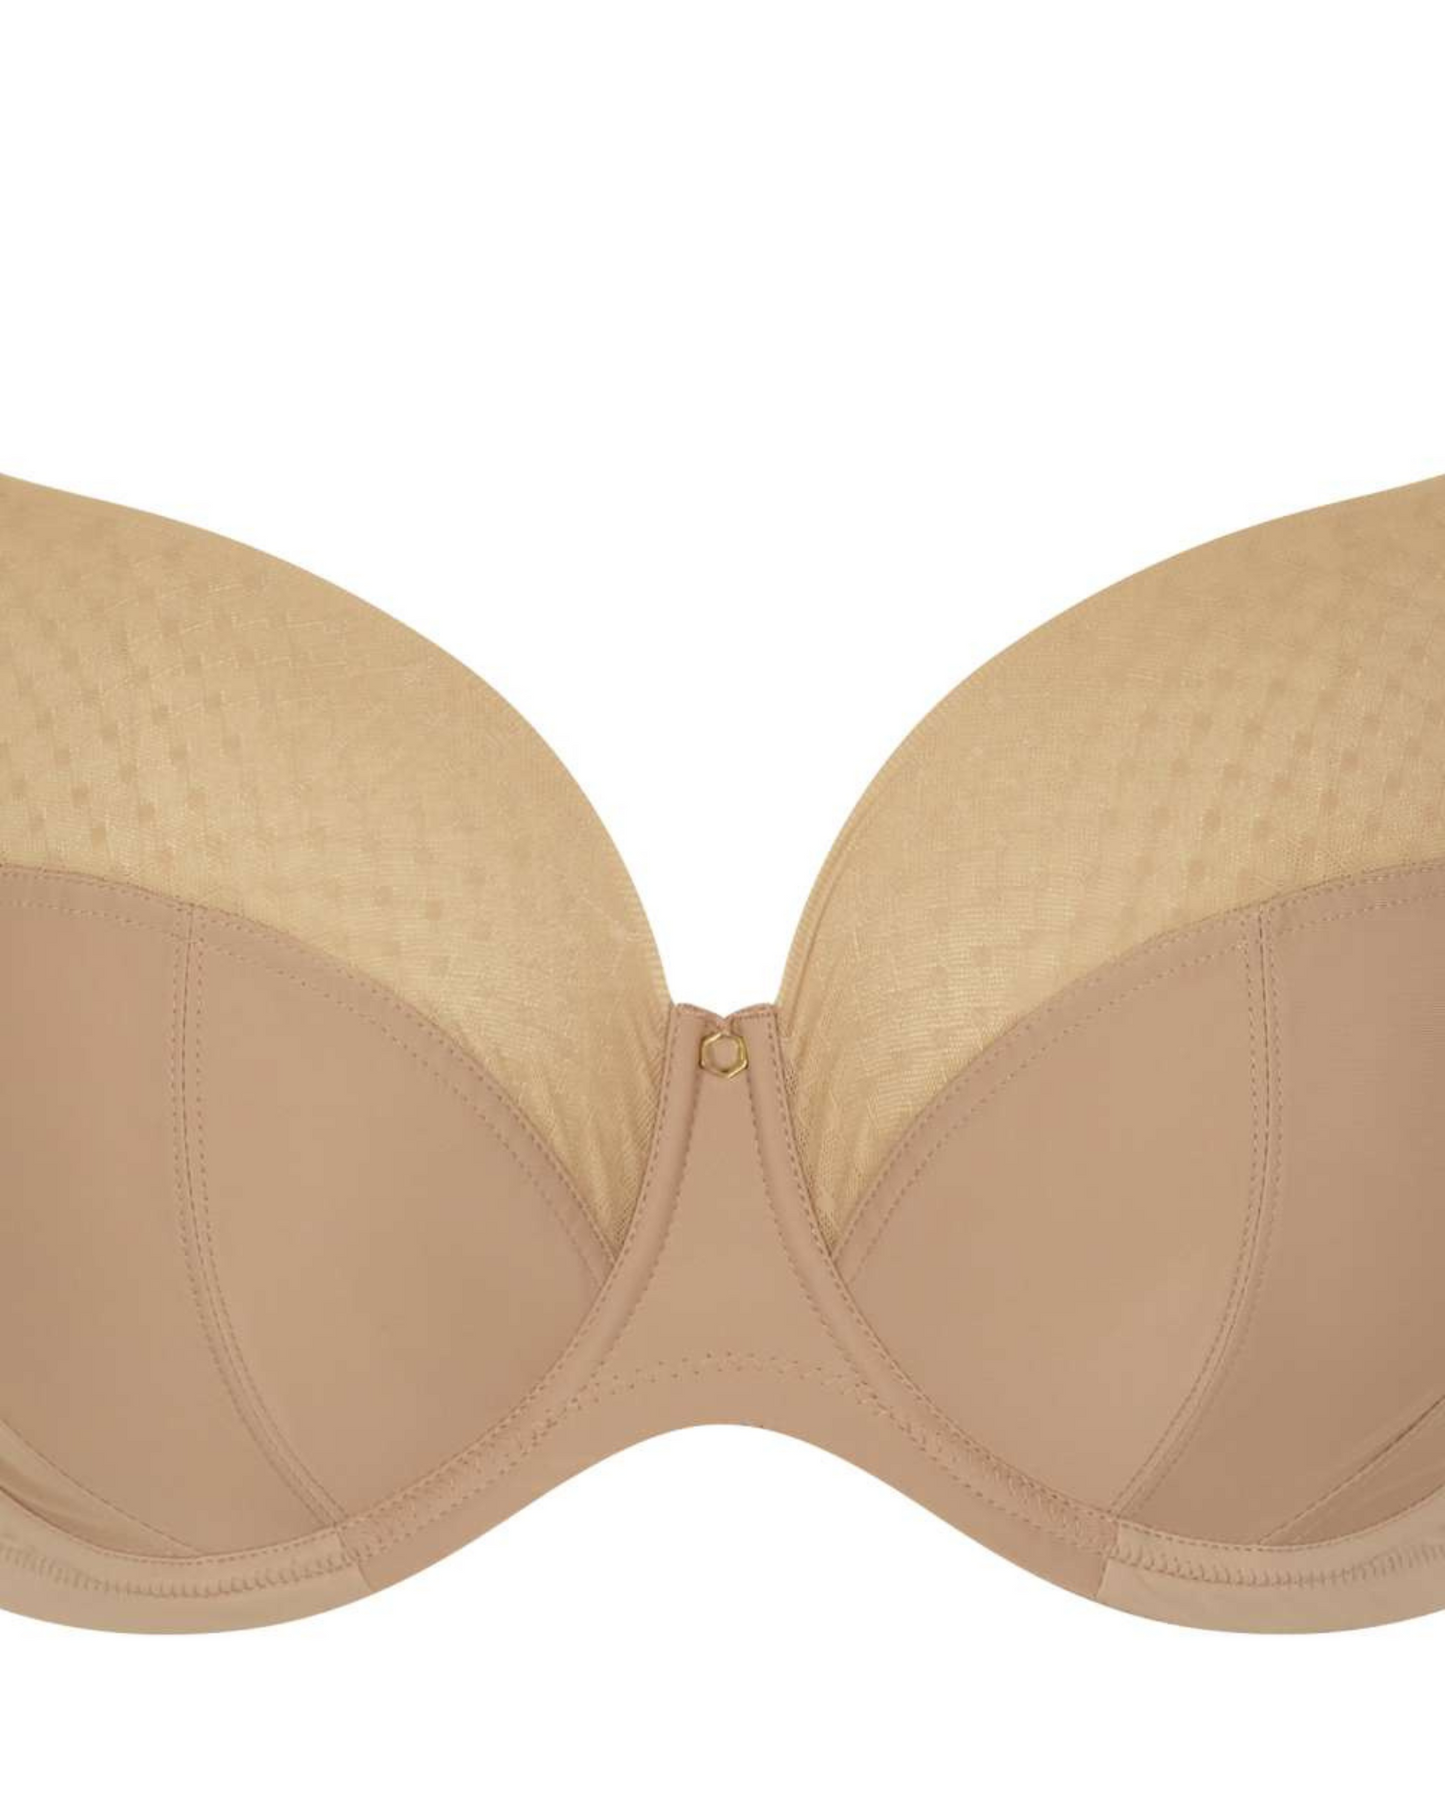 Sculptresse by Panache Bliss Underwire Full Cup Bra - 10685